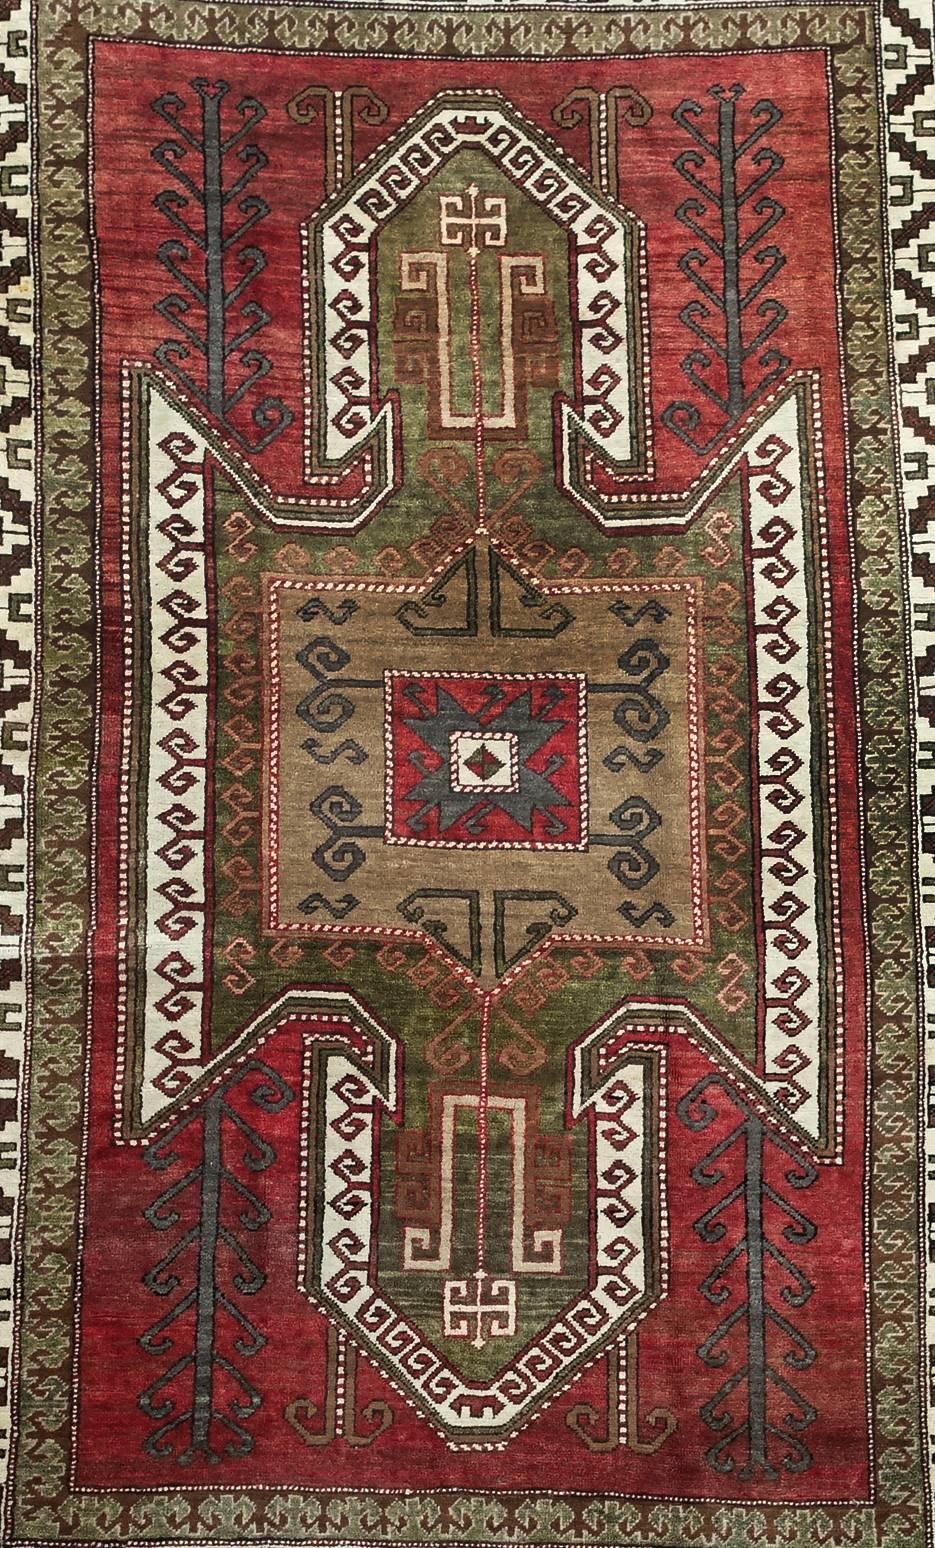 Large hand-knotted Turkish Kazak rug, circa 8.8 by 5.4 feet

Material: Wool on wool
Manufacturing period 1950-1999
Country: Turkey
Condition: In very good condition
This is a large, hand-knotted nomadic Kazak rug from the mountains near Kars